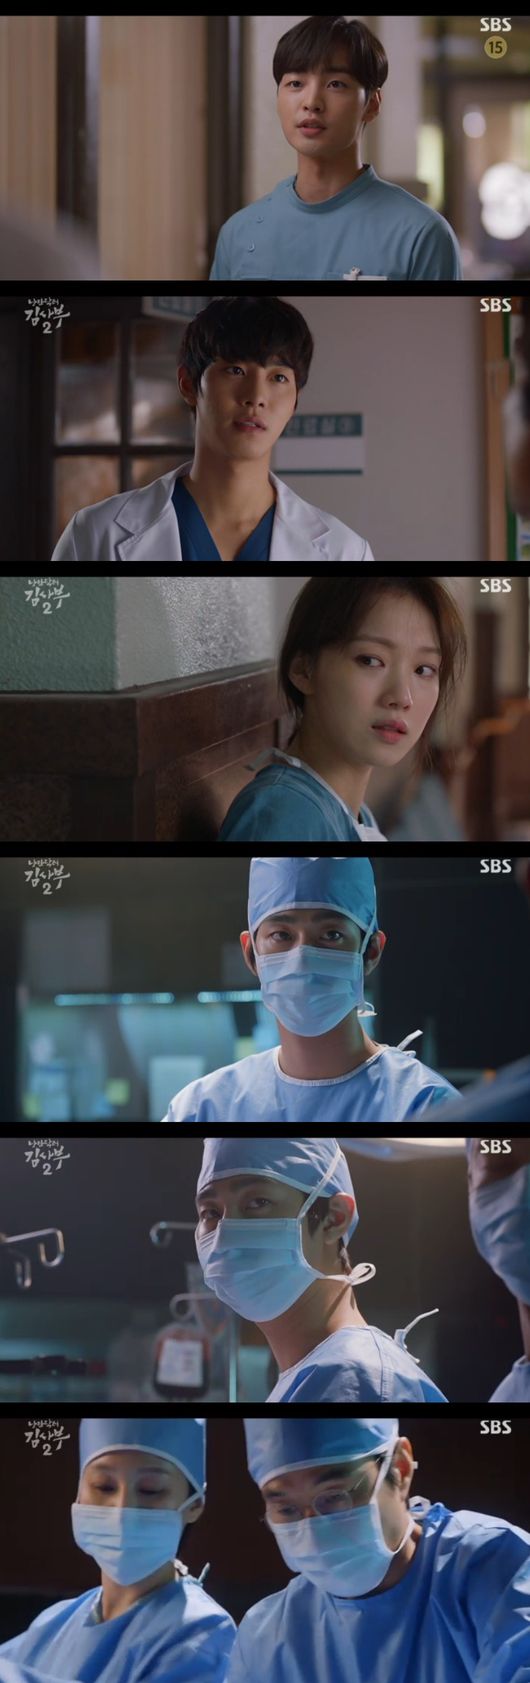 In Romantic Doctor Kim Sabu 2, Kim Ju-Hun caught the weakness of Han Suk-kyus surgery without CT.On the 14th, SBS Wolhwa Drama Romantic Doctor Kim Sabu Season 2 (director Yoo In-sik, Lee Gil-bok, and Kang Eun-kyung) Woojin (Ahn Hyo-seop) entered the surgery instead of Eun-jae (Lee Sung-kyung), while Kim Sabu (Han Suk-kyu) was in the process of Park Min-guk (Kim Ju-Hun Boone) has taken a weakness.On this day, Woojin (Ahn Hyo-seop) was ordered by Han Suk-kyu to climb together in the operating room of Kim Ju-Hun.Lee Sung-kyung, who did not know this, was betrayed by Woojin who took his place.Yeo Un-yeong (Kim Hong-pa) arrived at Doldam Hospital, where Kim Sa-bu had another patient surgery, and Park Min-guk received the details of Kim Sa-bus surgery based on Woojins briefing in the next room.At this time, Park Min-guk asked about CT confirmation, and Woojin honestly told the situation that the operation was performed without CT.Although the patient was in an inevitable situation in an urgent situation, the Republic of Korea took the weakness of the master, doubting how Kim Sabu performed the surgery without CT.I got a misunderstanding from Woojin saying, How much money did you get?Romantic Doctor Kim Sabu 2 captures the broadcast screen